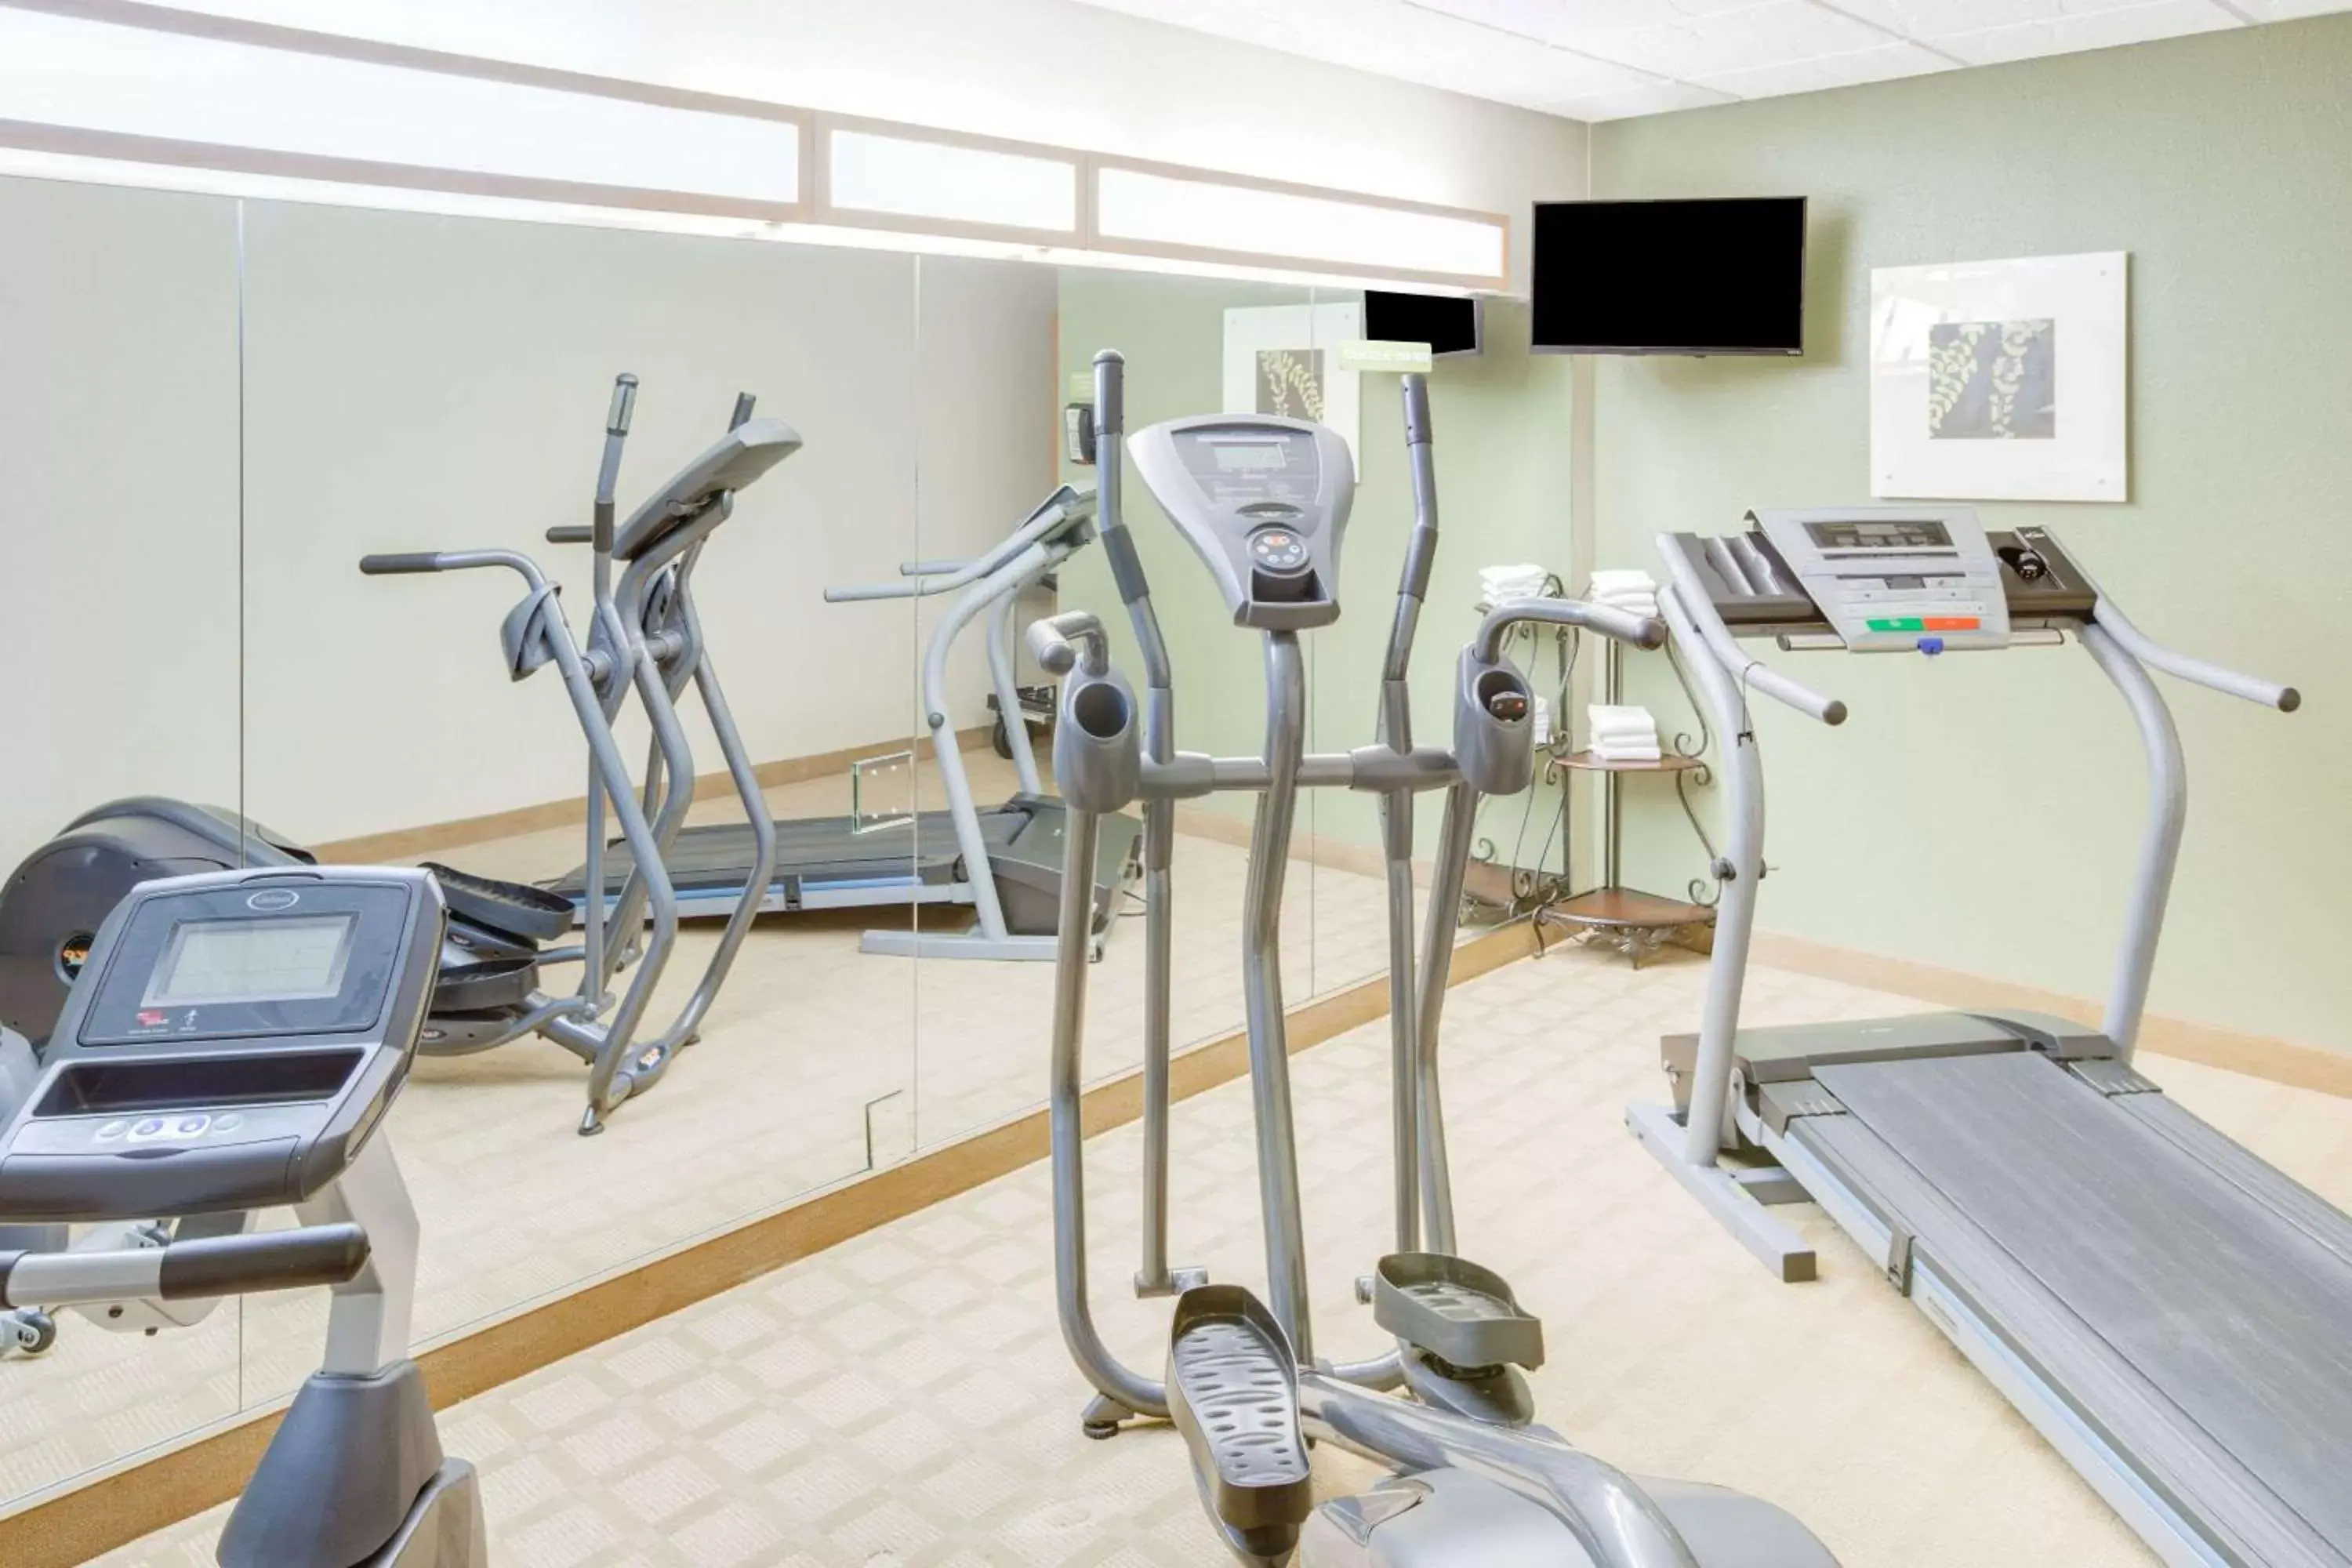 Fitness centre/facilities, Fitness Center/Facilities in Microtel Inn & Suites by Wyndham Saraland